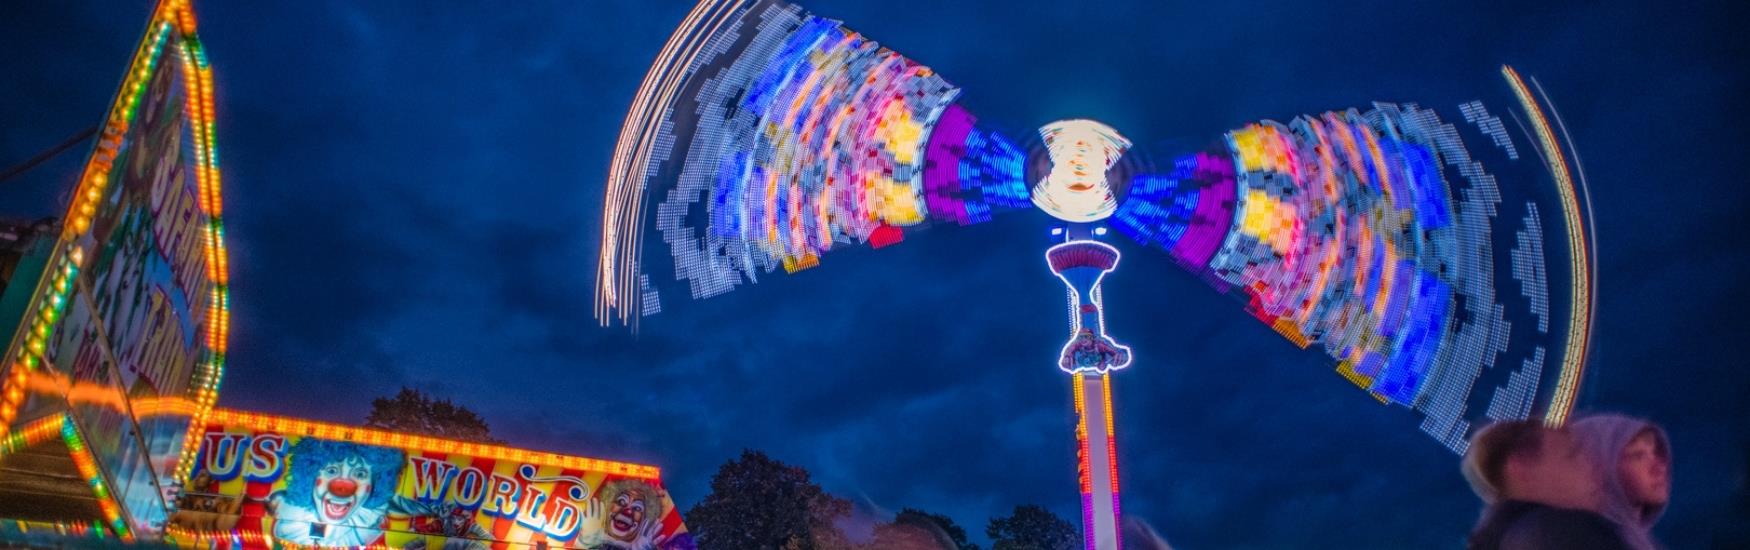 A fairground ride standing tall in the nightsky whilst spinning visitors around